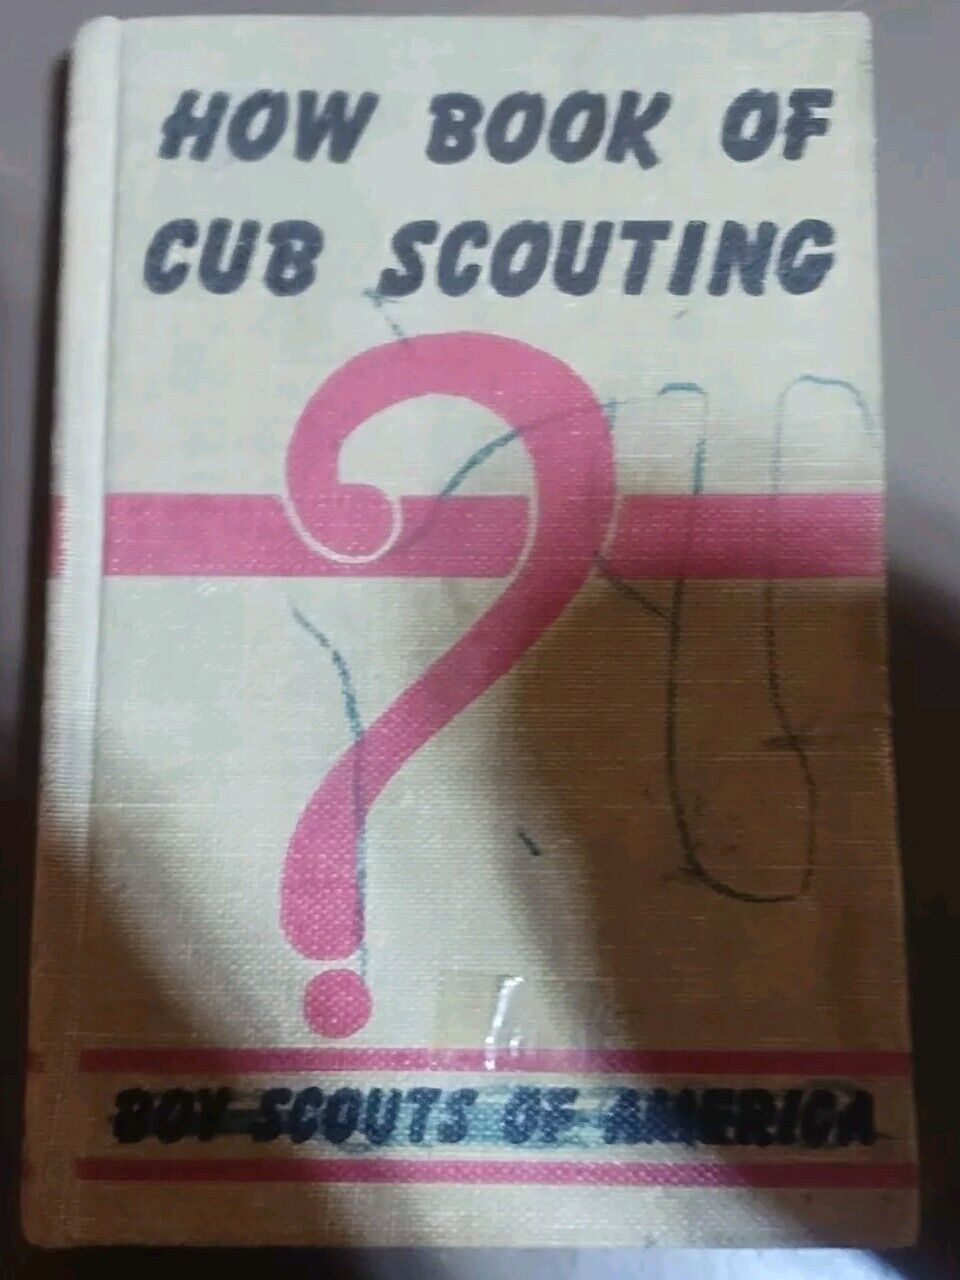 BOY SCOUT - 1963 HOW BOOK OF CUB SCOUTING     *